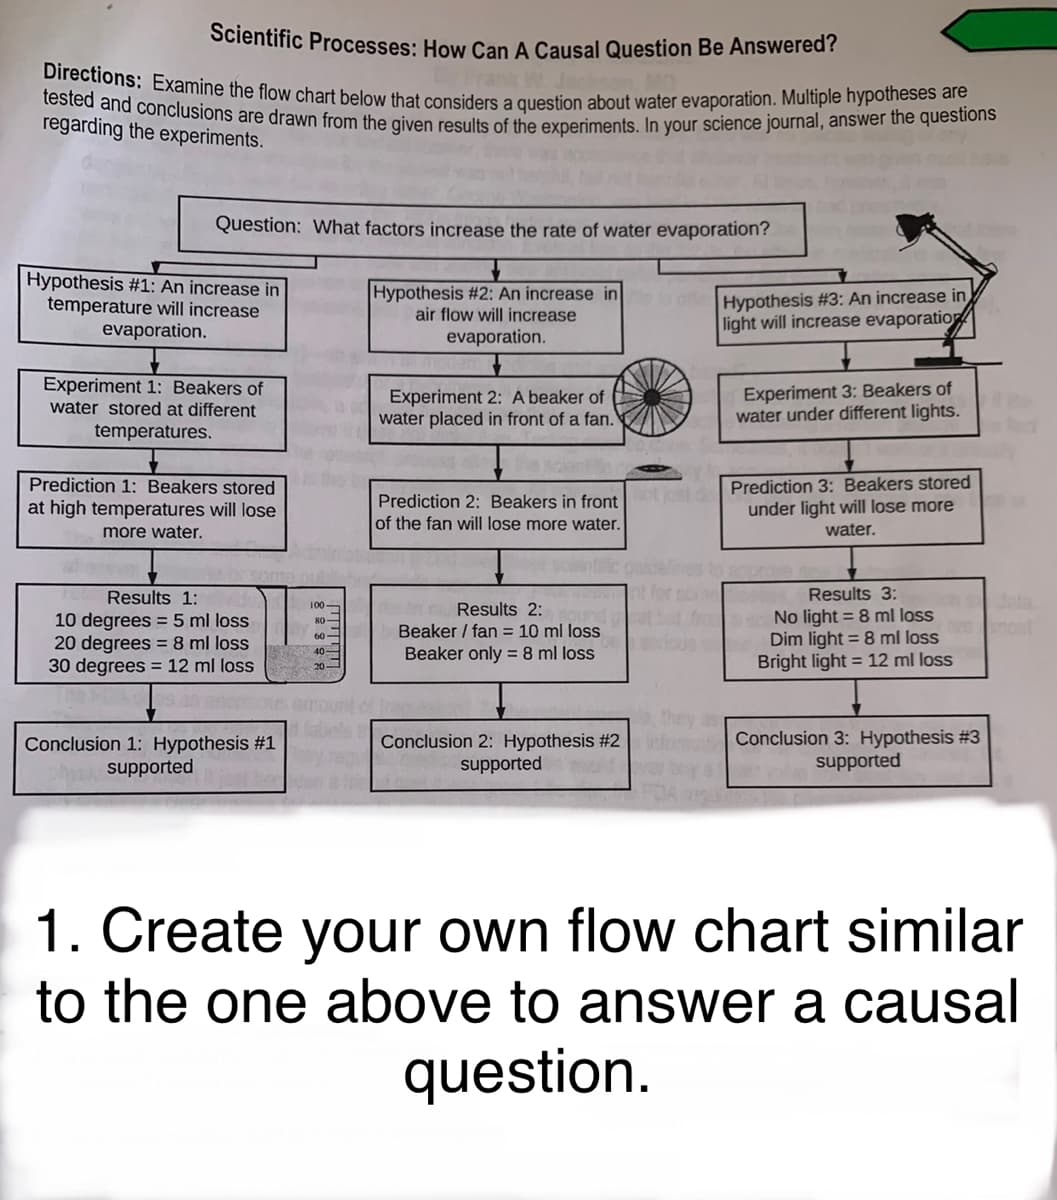 Scientific Processes: How Can A Causal Question Be Answered?
Directions: Examine the flow chart below that considers a question about water evaporation. Multiple hypotheses are
tested and conclusions are drawn from the given results of the experiments. In your science journal, answer the questions
regarding the experiments.
Question: What factors increase the rate of water evaporation?
Hypothesis #1: An increase in
temperature will increase
evaporation.
Experiment 1: Beakers of
water stored at different
temperatures.
Prediction 1: Beakers stored
at high temperatures will lose
more water.
Results 1:
10 degrees = 5 ml loss
20 degrees = 8 ml loss
30 degrees = 12 ml loss
The
Conclusion 1: Hypothesis #1
supported
100-
80
60-
40
20
sy regu
Use & tre
Hypothesis #2: An increase in
air flow will increase
evaporation.
Experiment 2: A beaker of
water placed in front of a fan.
Results 2: sound
Beaker / fan = 10 ml loss
Beaker only = 8 ml loss.
off Hypothesis #3: An increase in
light will increase evaporation
Prediction 2: Beakers in frontot just d Prediction 3: Beakers stored
under light will lose more
of the fan will lose more water.
water.
Conclusion 2: Hypothesis #2
supported
Experiment 3: Beakers of
water under different lights.
approve
Results 3:
No light = 8 ml loss
Dim light = 8 ml loss
Bright light = 12 ml loss
are
Conclusion 3: Hypothesis #3
supported
data
most
1. Create your own flow chart similar
to the one above to answer a causal
question.